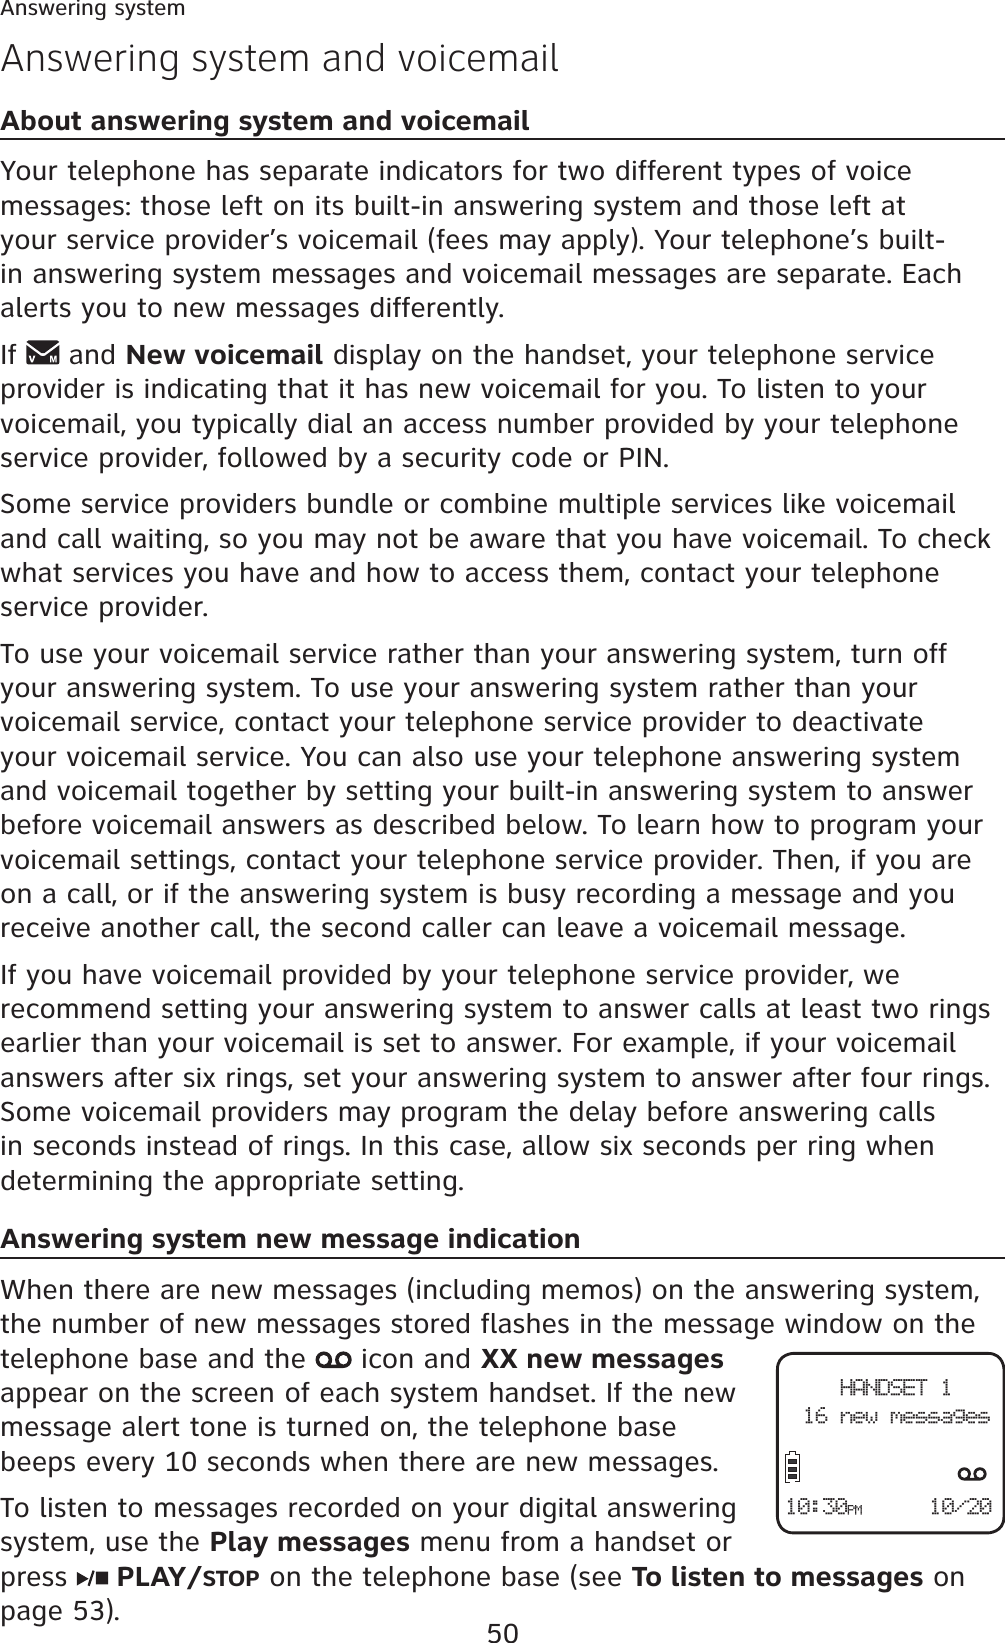 50Answering system and voicemailAbout answering system and voicemailYour telephone has separate indicators for two different types of voice messages: those left on its built-in answering system and those left at your service provider’s voicemail (fees may apply). Your telephone’s built-in answering system messages and voicemail messages are separate. Each alerts you to new messages differently.If  and New voicemail display on the handset, your telephone service provider is indicating that it has new voicemail for you. To listen to your voicemail, you typically dial an access number provided by your telephone service provider, followed by a security code or PIN.Some service providers bundle or combine multiple services like voicemail and call waiting, so you may not be aware that you have voicemail. To check what services you have and how to access them, contact your telephone service provider.To use your voicemail service rather than your answering system, turn off your answering system. To use your answering system rather than your voicemail service, contact your telephone service provider to deactivate your voicemail service. You can also use your telephone answering system and voicemail together by setting your built-in answering system to answer before voicemail answers as described below. To learn how to program your voicemail settings, contact your telephone service provider. Then, if you are on a call, or if the answering system is busy recording a message and you receive another call, the second caller can leave a voicemail message.If you have voicemail provided by your telephone service provider, we recommend setting your answering system to answer calls at least two rings earlier than your voicemail is set to answer. For example, if your voicemail answers after six rings, set your answering system to answer after four rings. Some voicemail providers may program the delay before answering calls in seconds instead of rings. In this case, allow six seconds per ring when determining the appropriate setting.Answering system new message indicationWhen there are new messages (including memos) on the answering system, the number of new messages stored flashes in the message window on the telephone base and the   icon and XX new messagesappear on the screen of each system handset. If the new message alert tone is turned on, the telephone base beeps every 10 seconds when there are new messages.To listen to messages recorded on your digital answering system, use the Play messages menu from a handset or press   PLAY/STOP on the telephone base (see To listen to messages on page 53).Answering systemHANDSET 116 new messages10/2010:30PM